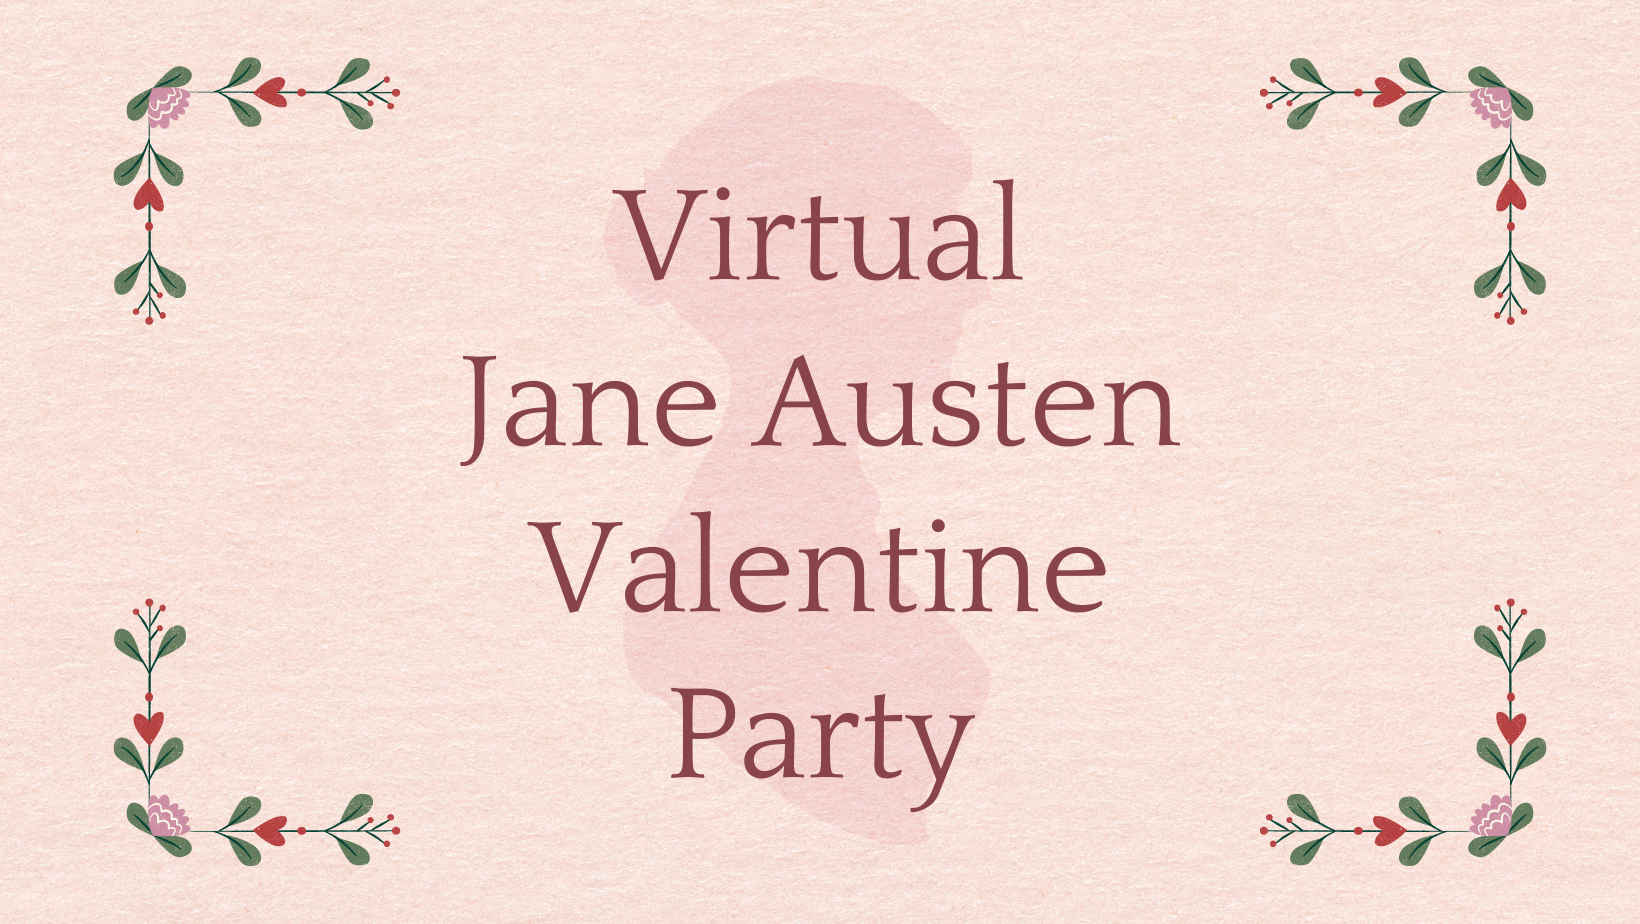 Welcome to the Virtual Jane Austen Valentine Party Gallery!